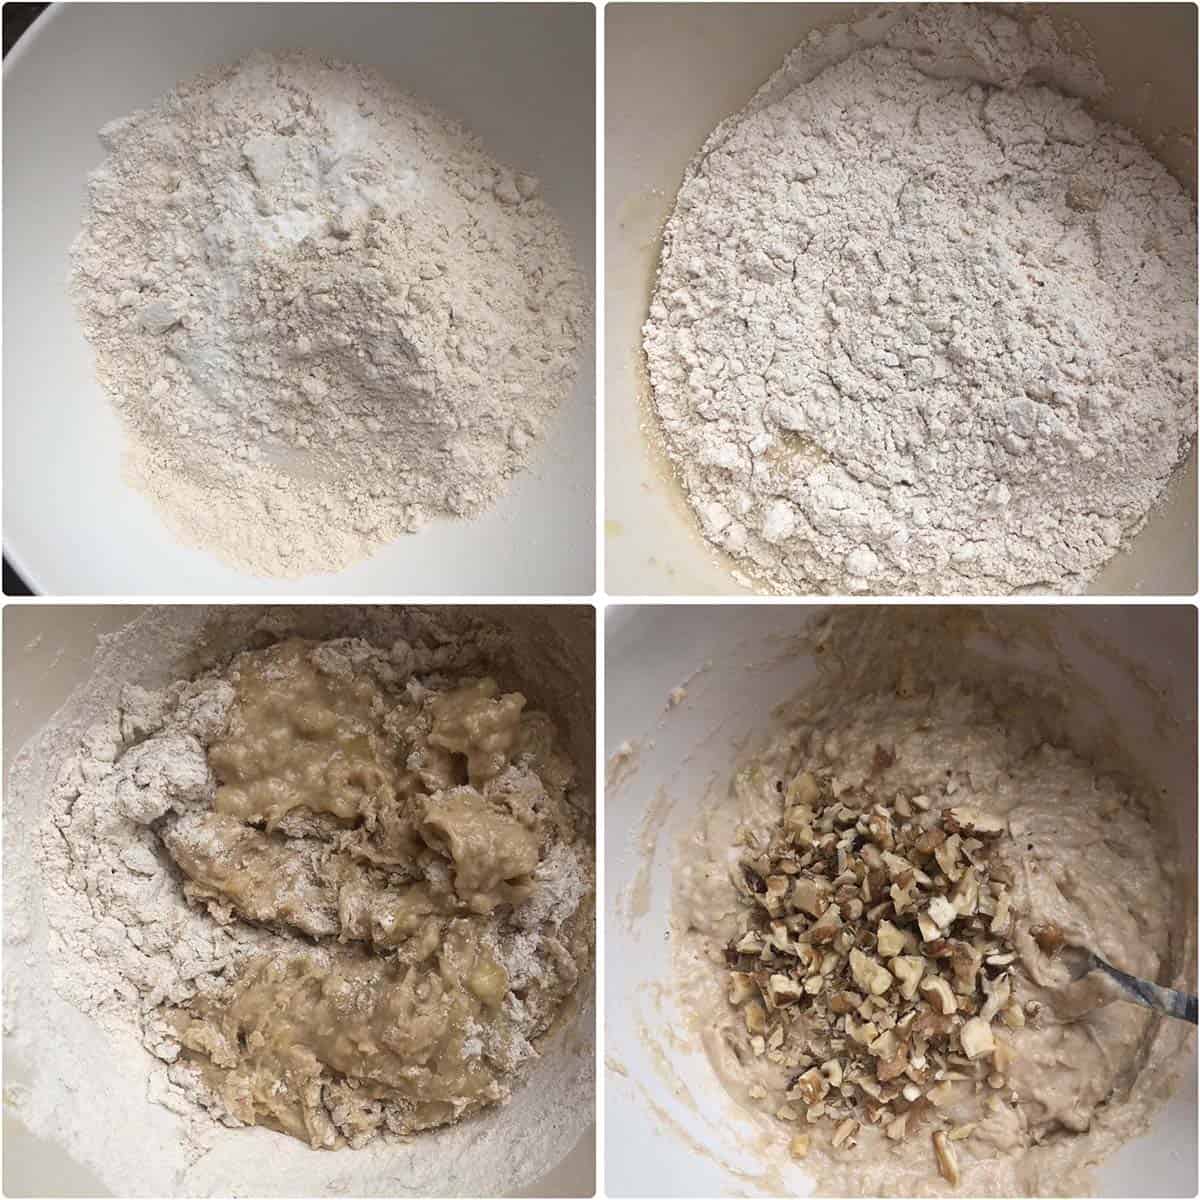 4 panel photos showing dry ingredients being mixed with wet ingredients.